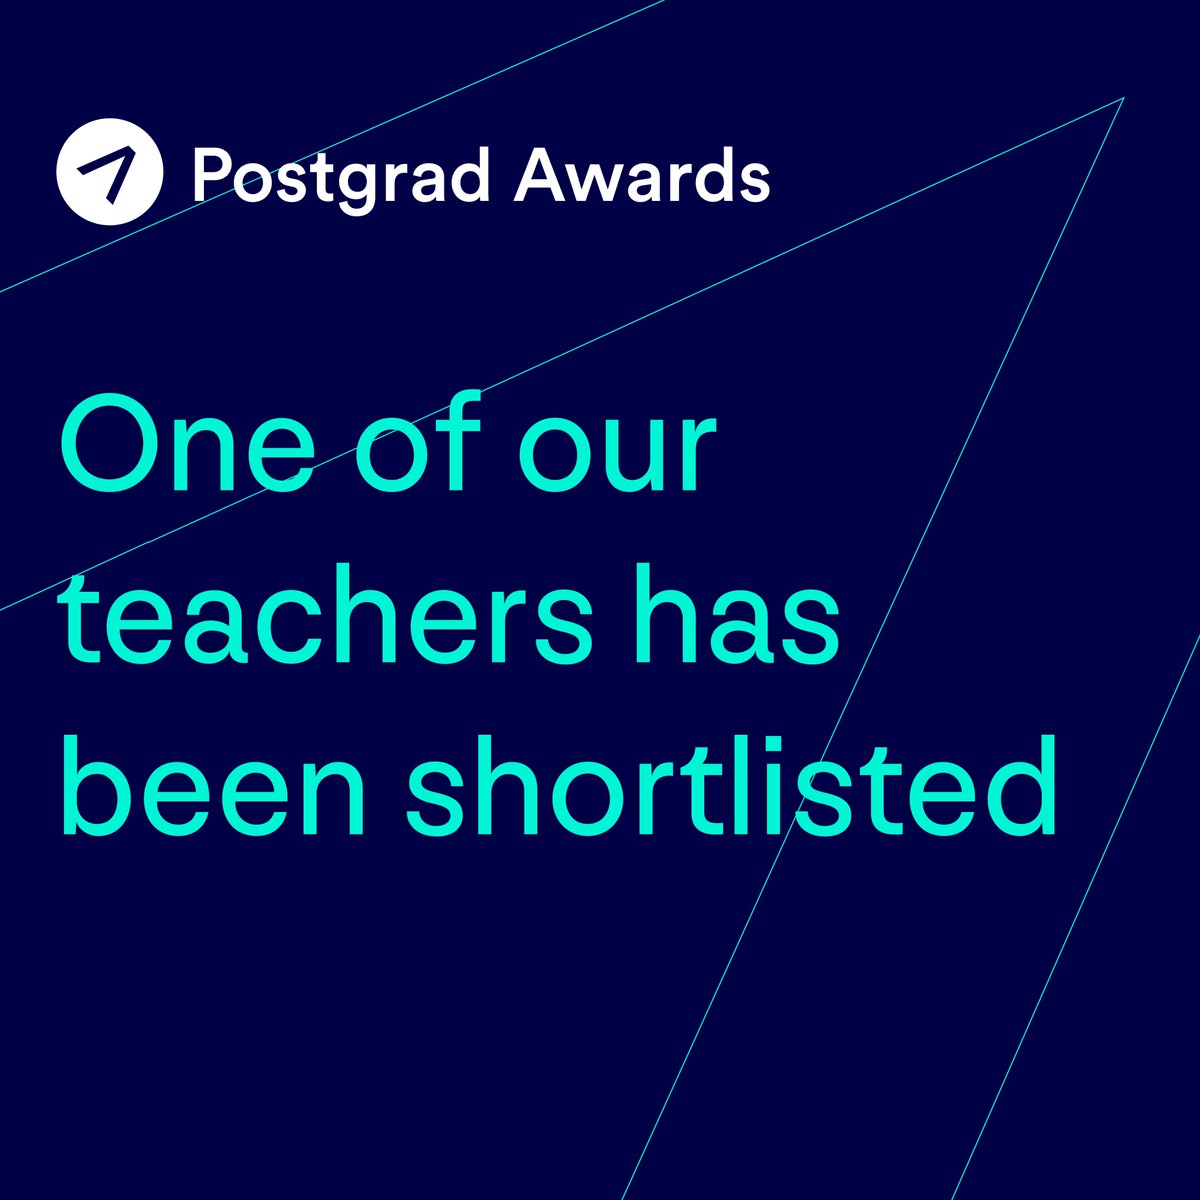 We are thrilled to announce that the @uniofsuffolk Lindsey Scott has been shortlisted for a Postgrad Award in the category of Masters Teacher🥳🎉 🎉🥳Thank you for the nomination and we’re keeping everything crossed  for the winner's announcement in September🤞 #PostgradAwards